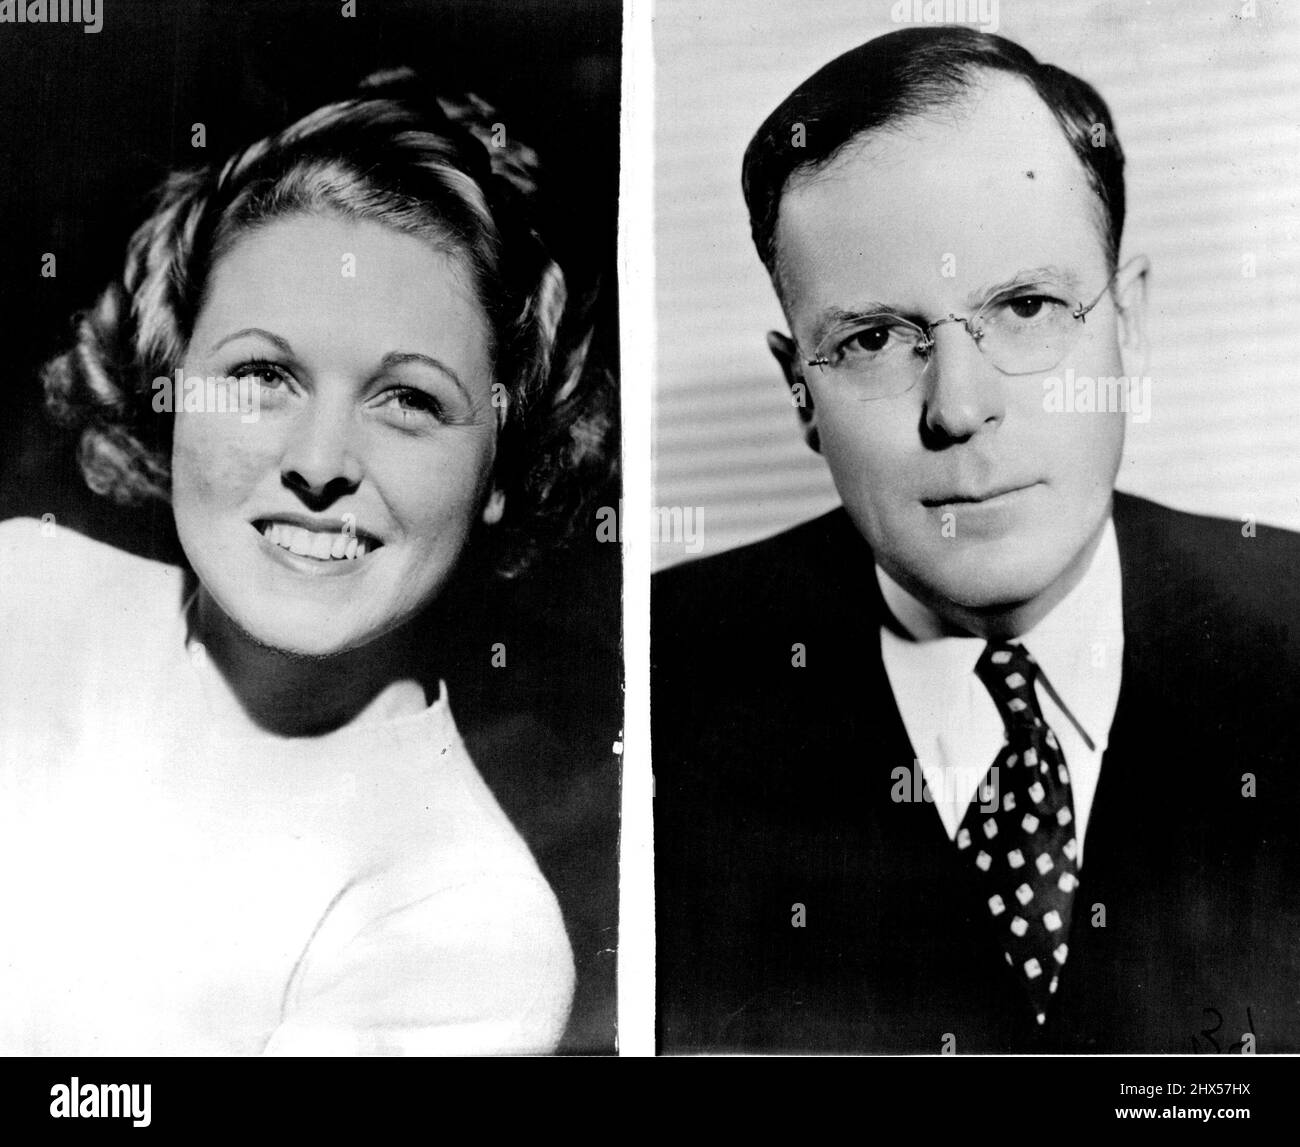 Amelia Earhart Mate To Wed Socialite -- Recent portraits of Mrs. Jean-Marie Consigny James and George Palmer Putnam. Mrs. Jean-Marie Consigny James, beverly hills socialite, whose divorce decree from William Robert James becomes final on May 18, and George Palmer Putnam, husband of the Late Amelia Earhart, plan to wed Early in June, friends of the couple have said. March 05, 1939. (Photo by ACME). Stock Photo